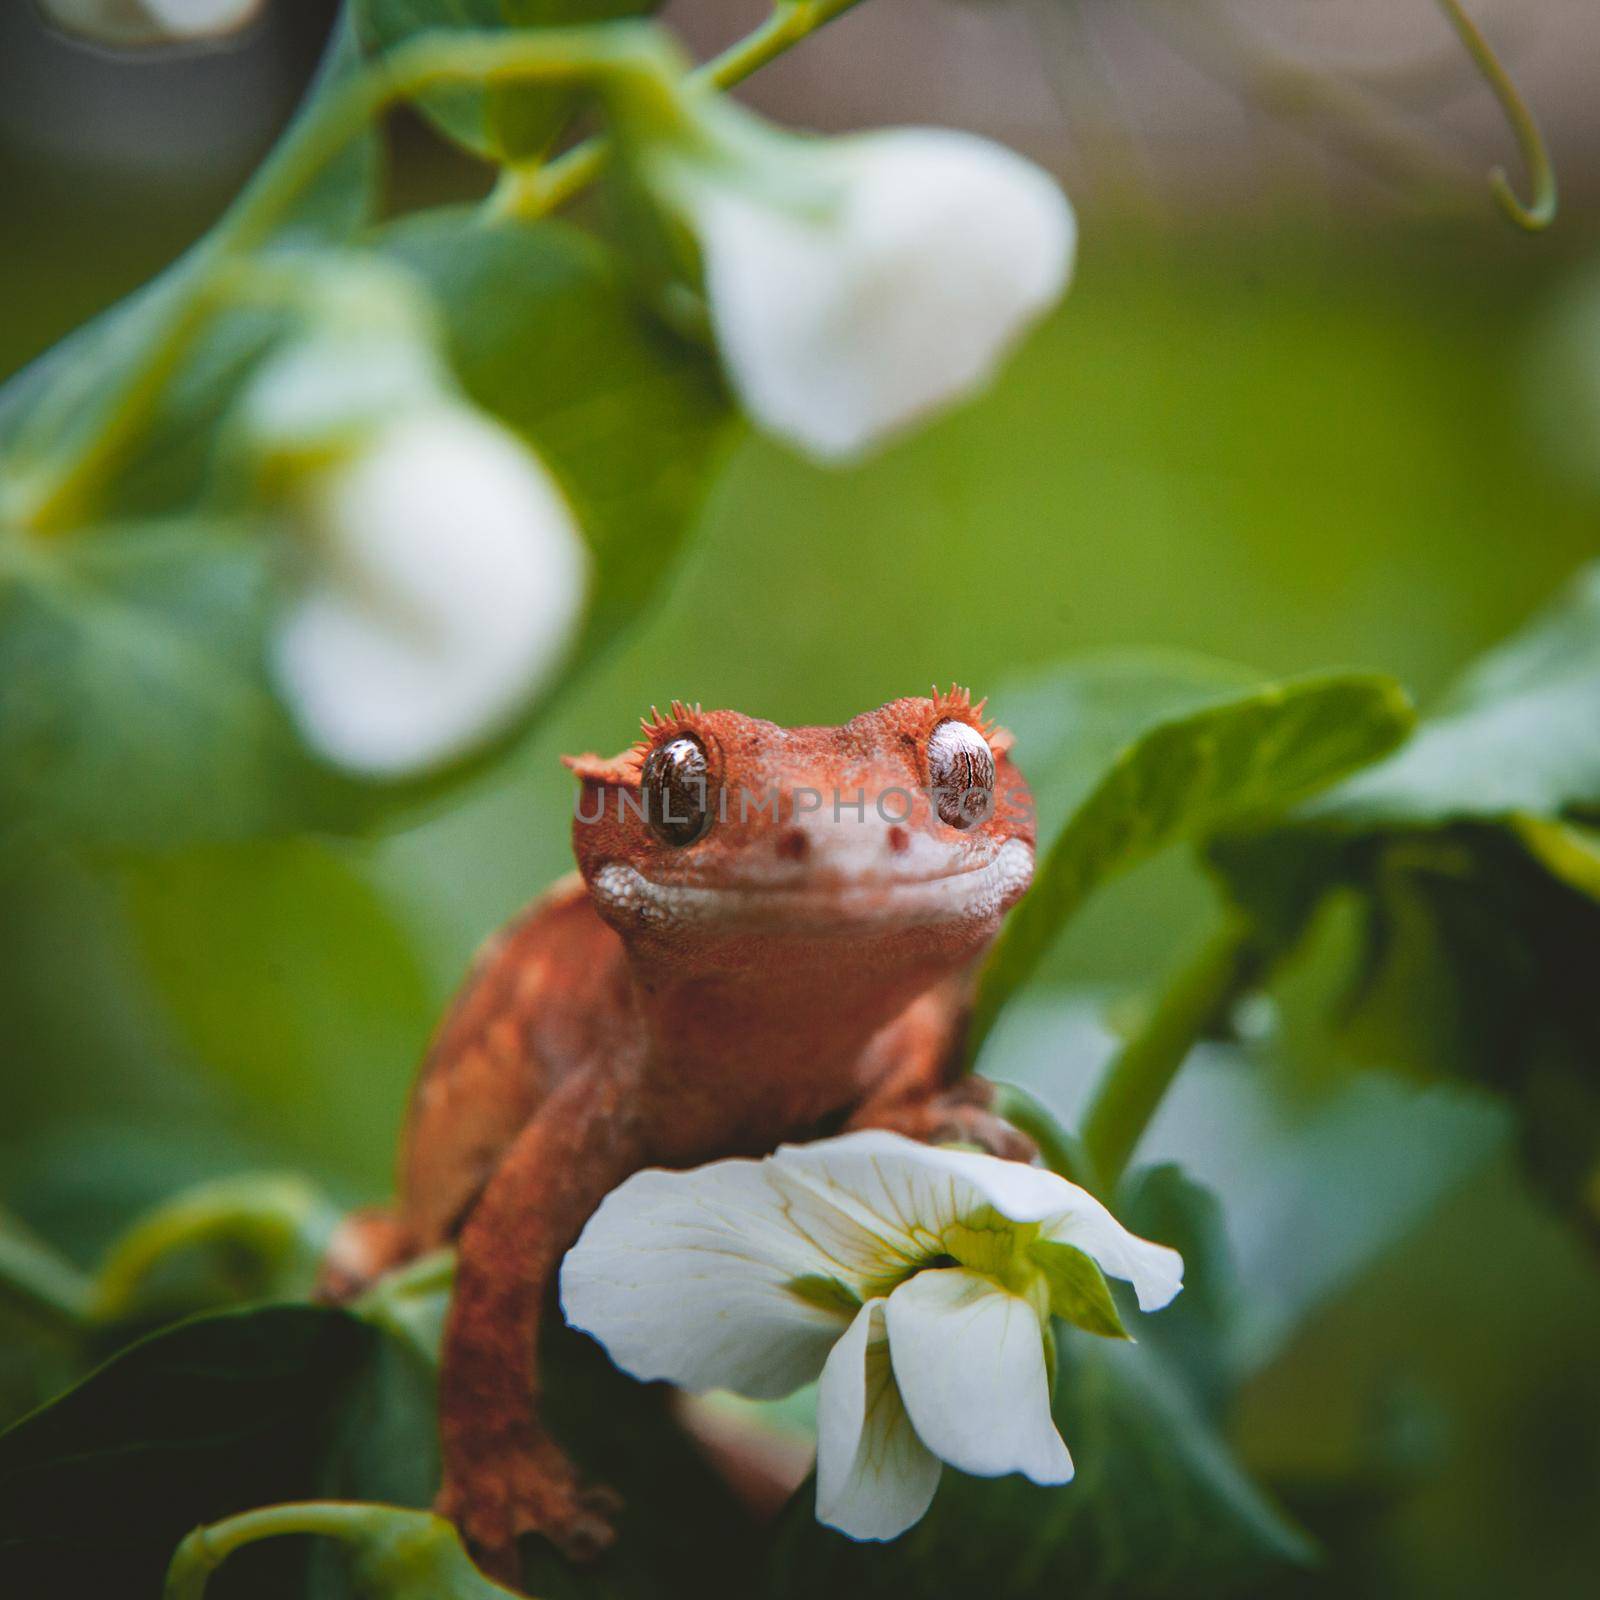 New Caledonian crested gecko, Rhacodactylus ciliatus, with white flowers